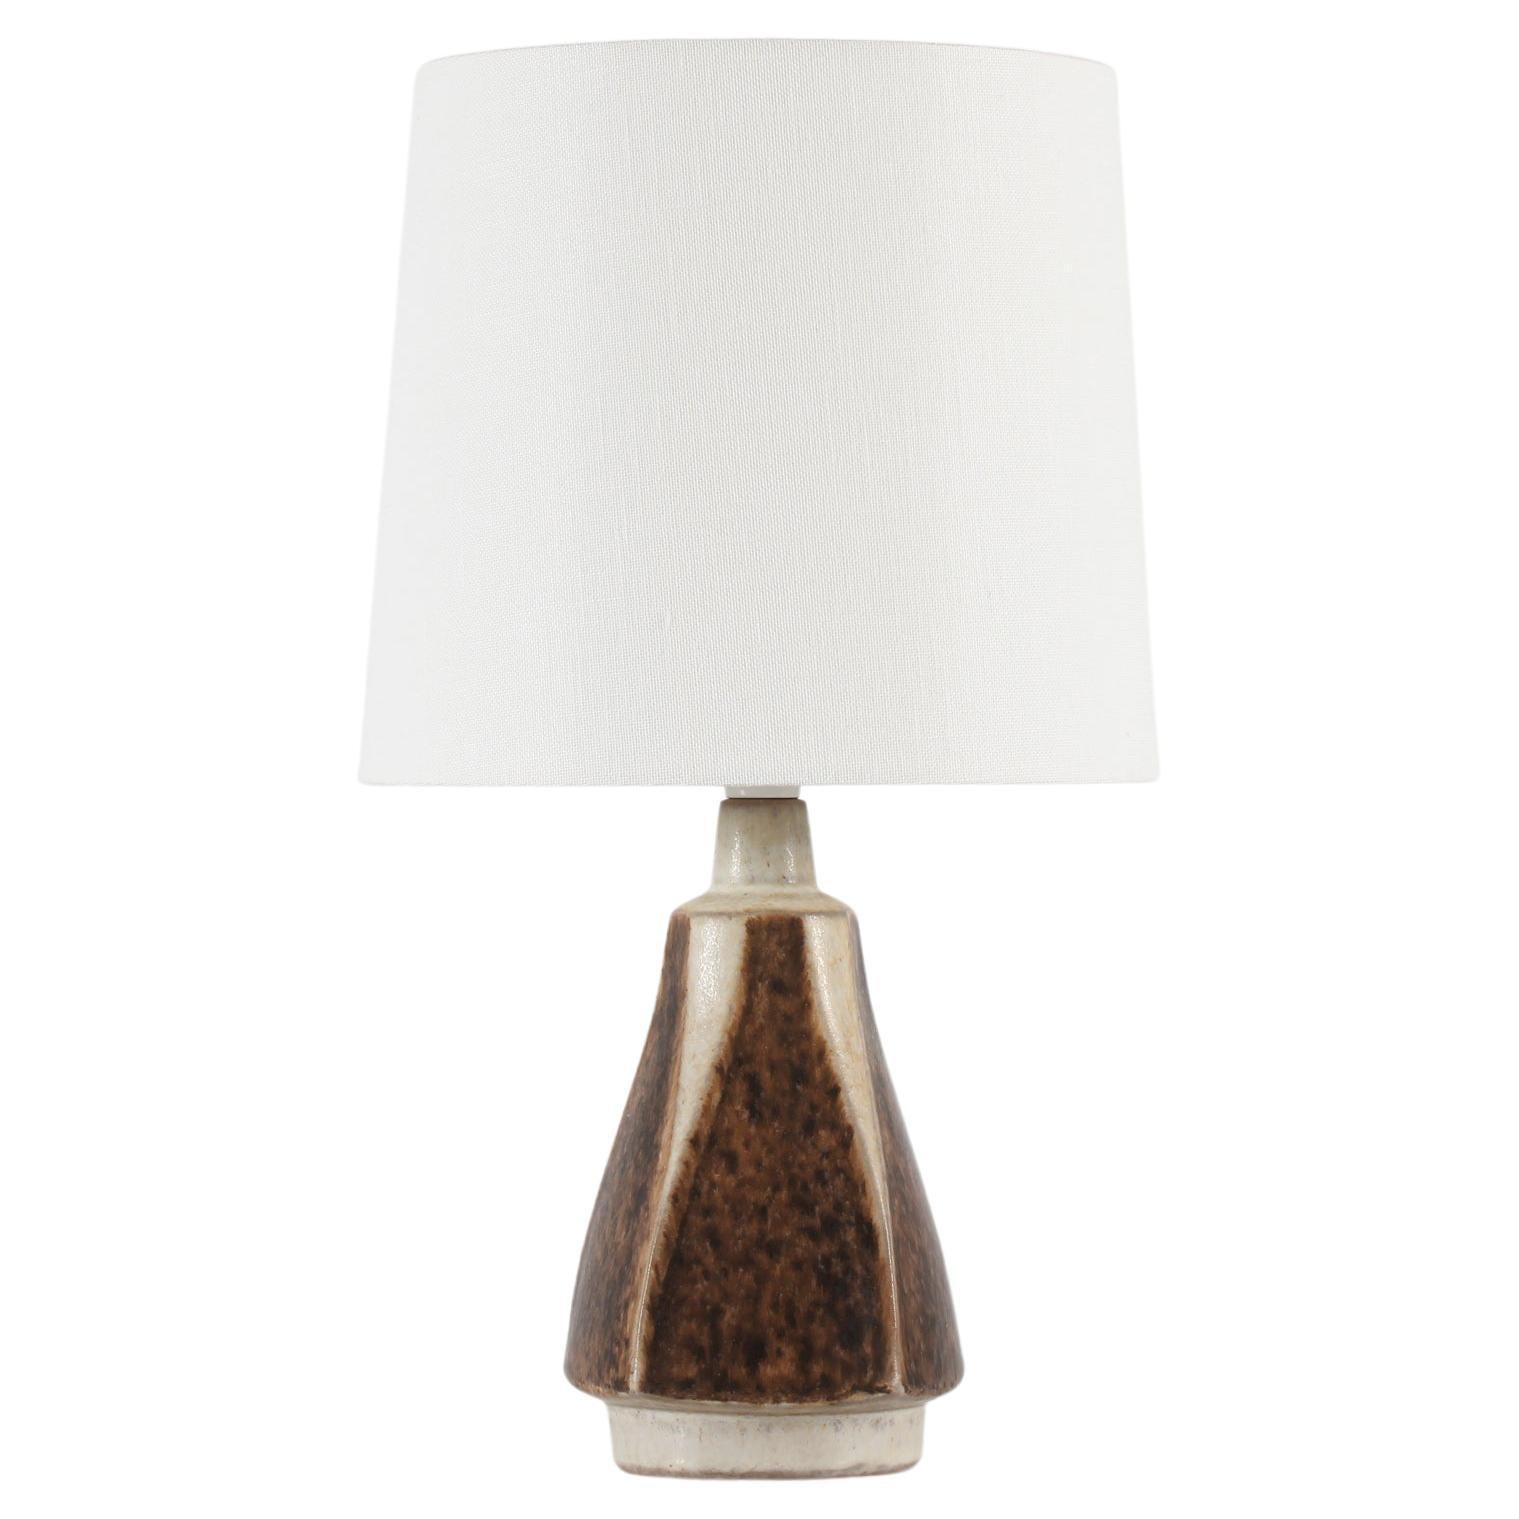 Bedside Stoneware Table Lamp by Marianne Starck and Michael Andersen & Søn 1960s